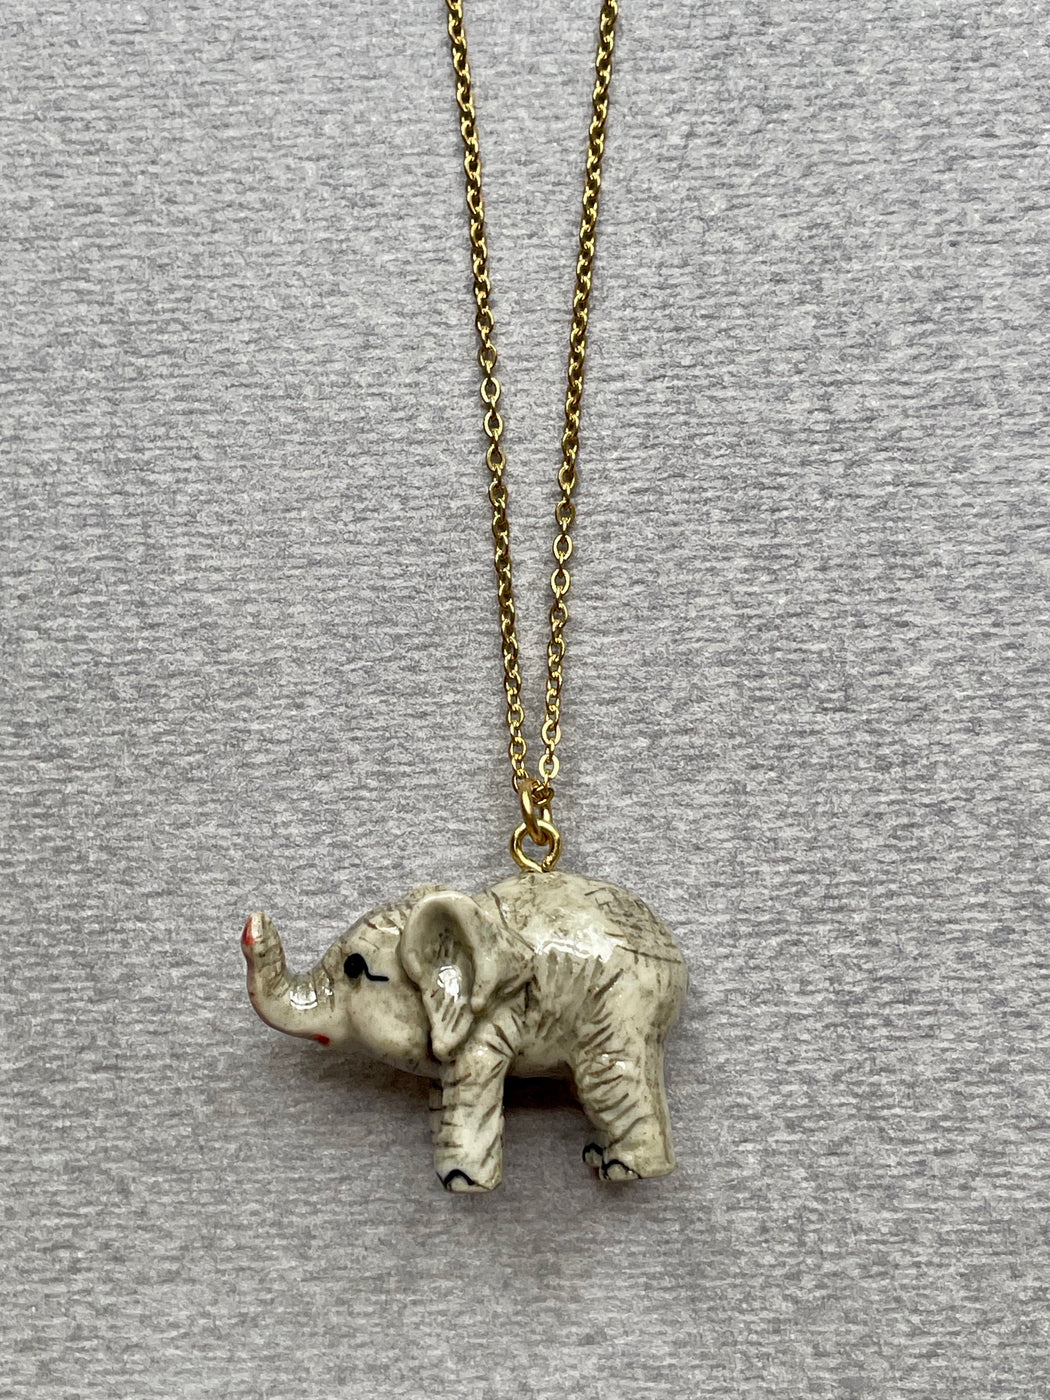 Porcelain "Baby Elephant" Pendant by Camp Hollow